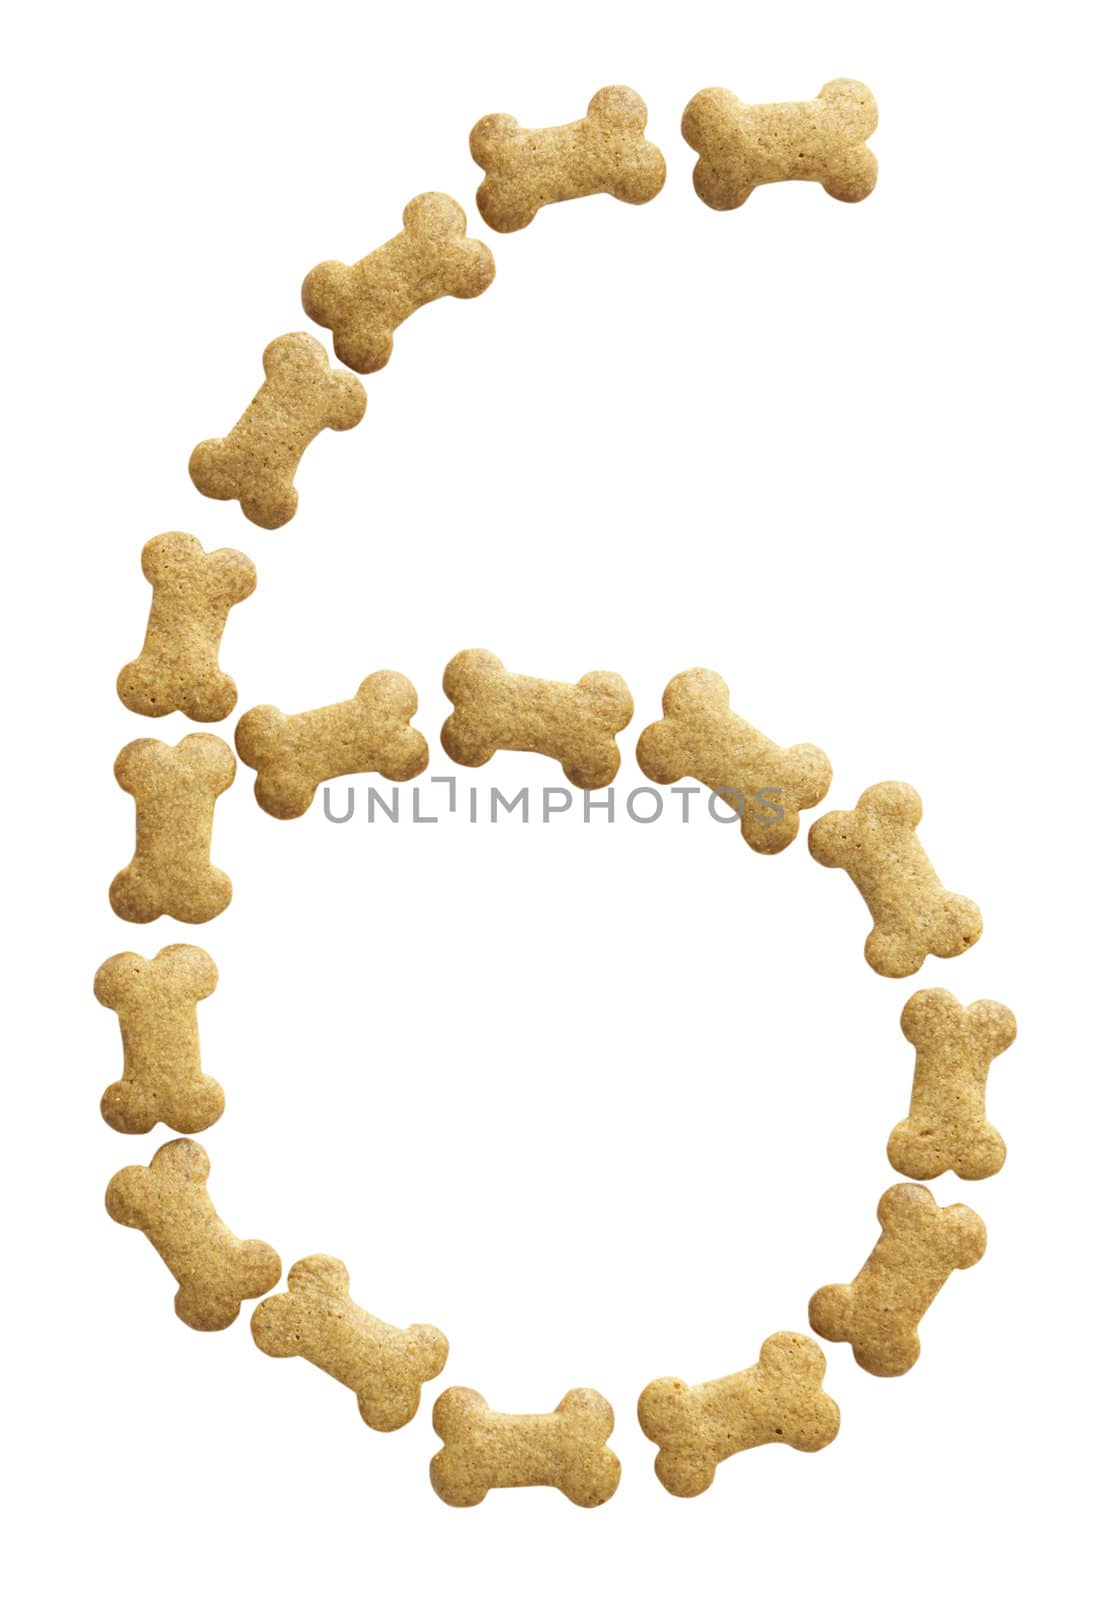 Number 6 made of bone shape dog food on white background, shot directly from above